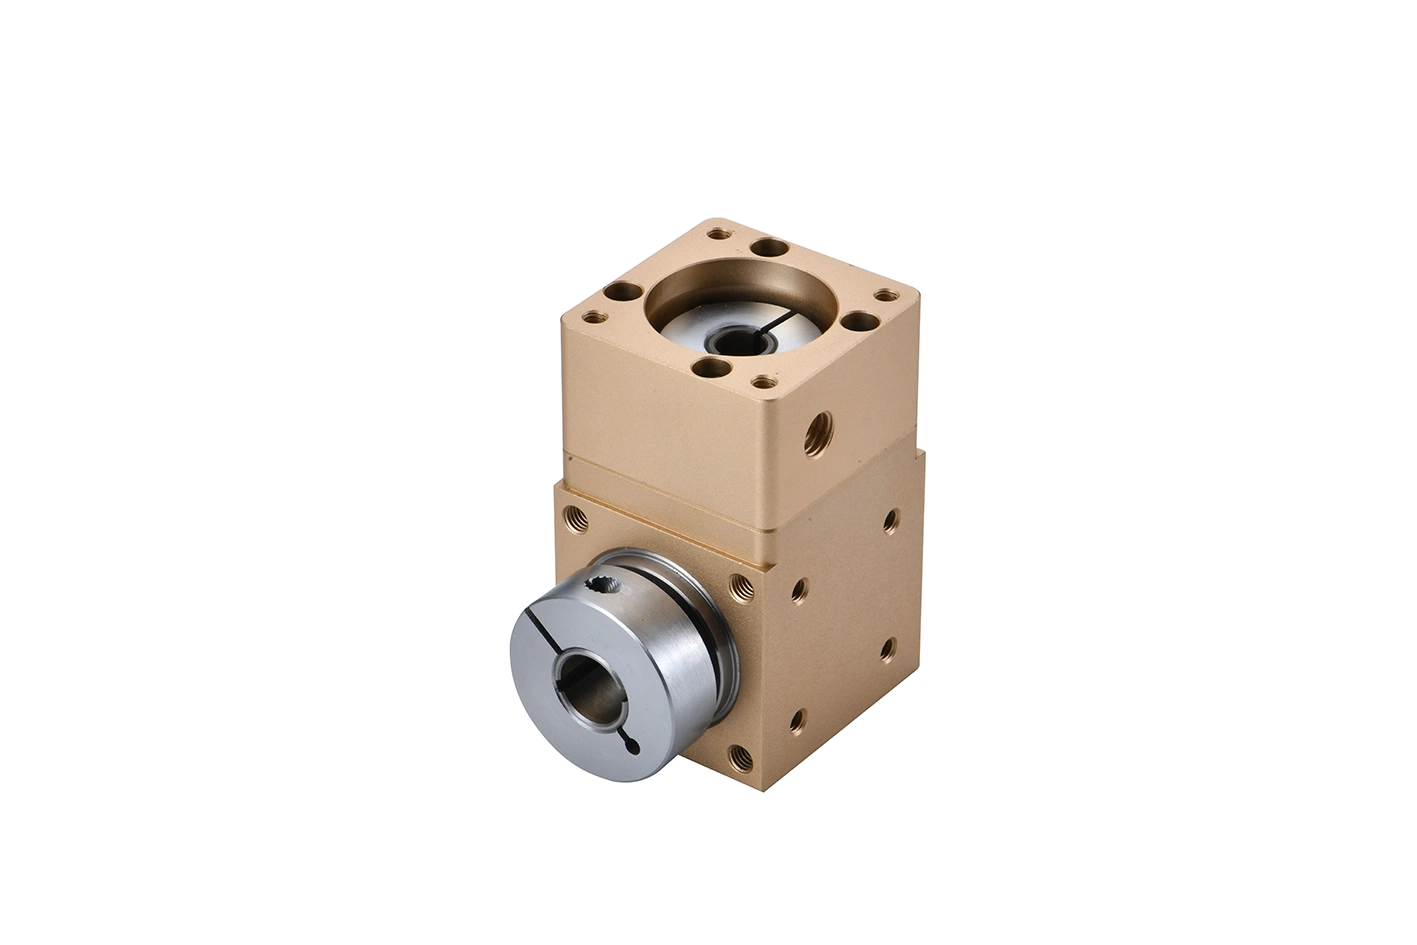 at Series Right Angle Spur Gear Planetary Reducer, Spur Gear Transmission, High-Speed High Torque Right Angle Steering Box